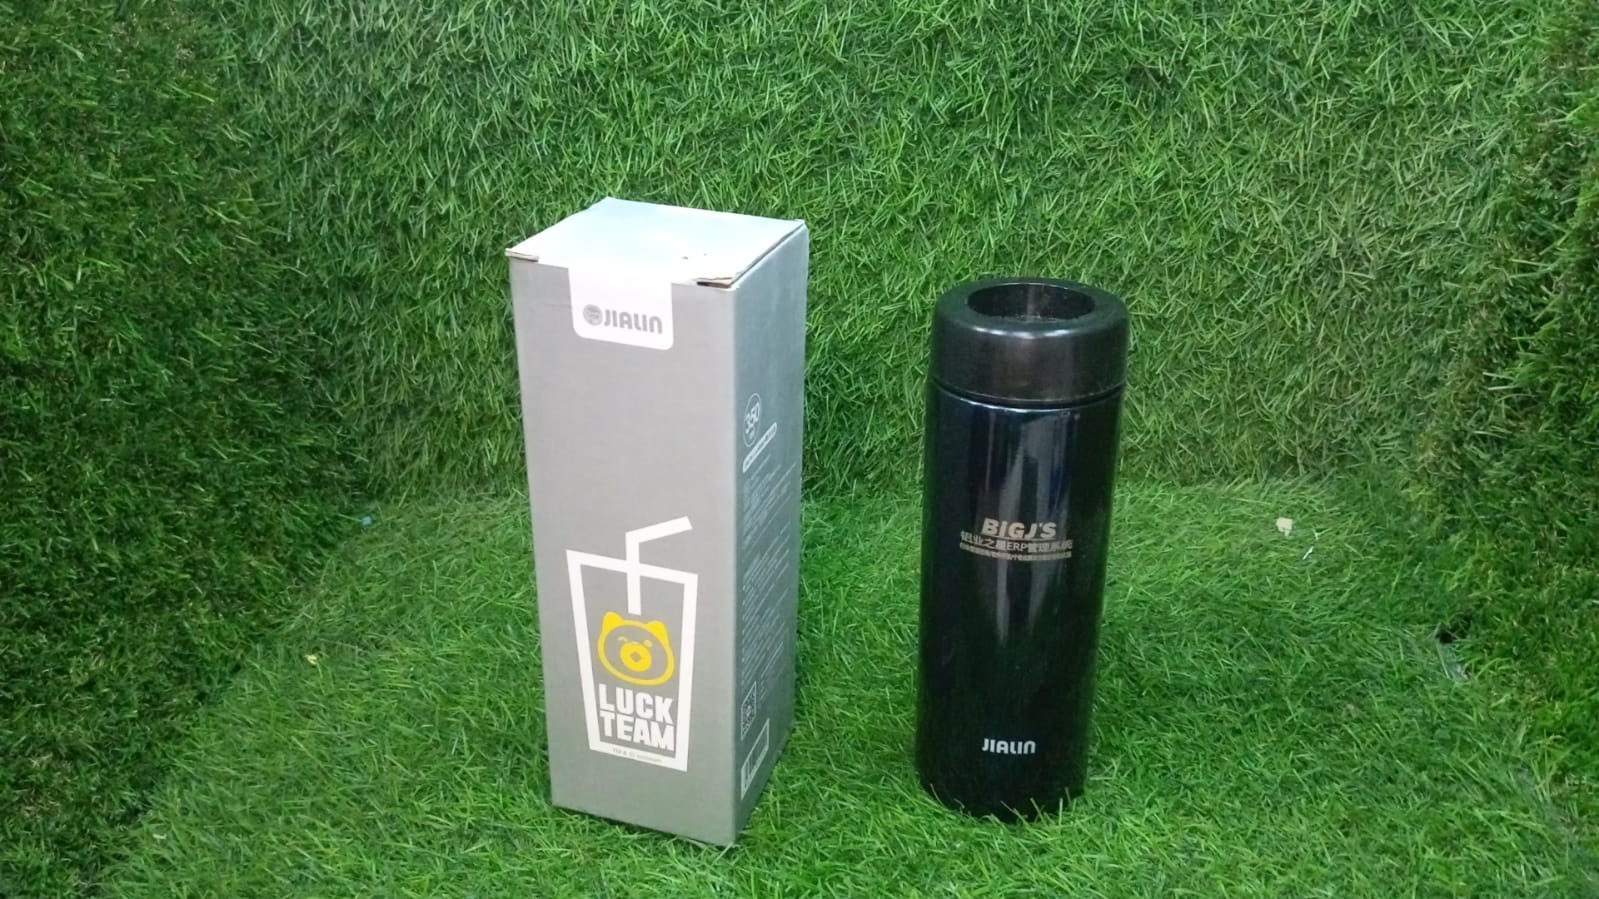 Hot and Cold Stainless Steel Thermos Water Bottle Easy to Carry | Rust & Leak Proof | Tea | Coffee | Office| Gym | Home (350ml)